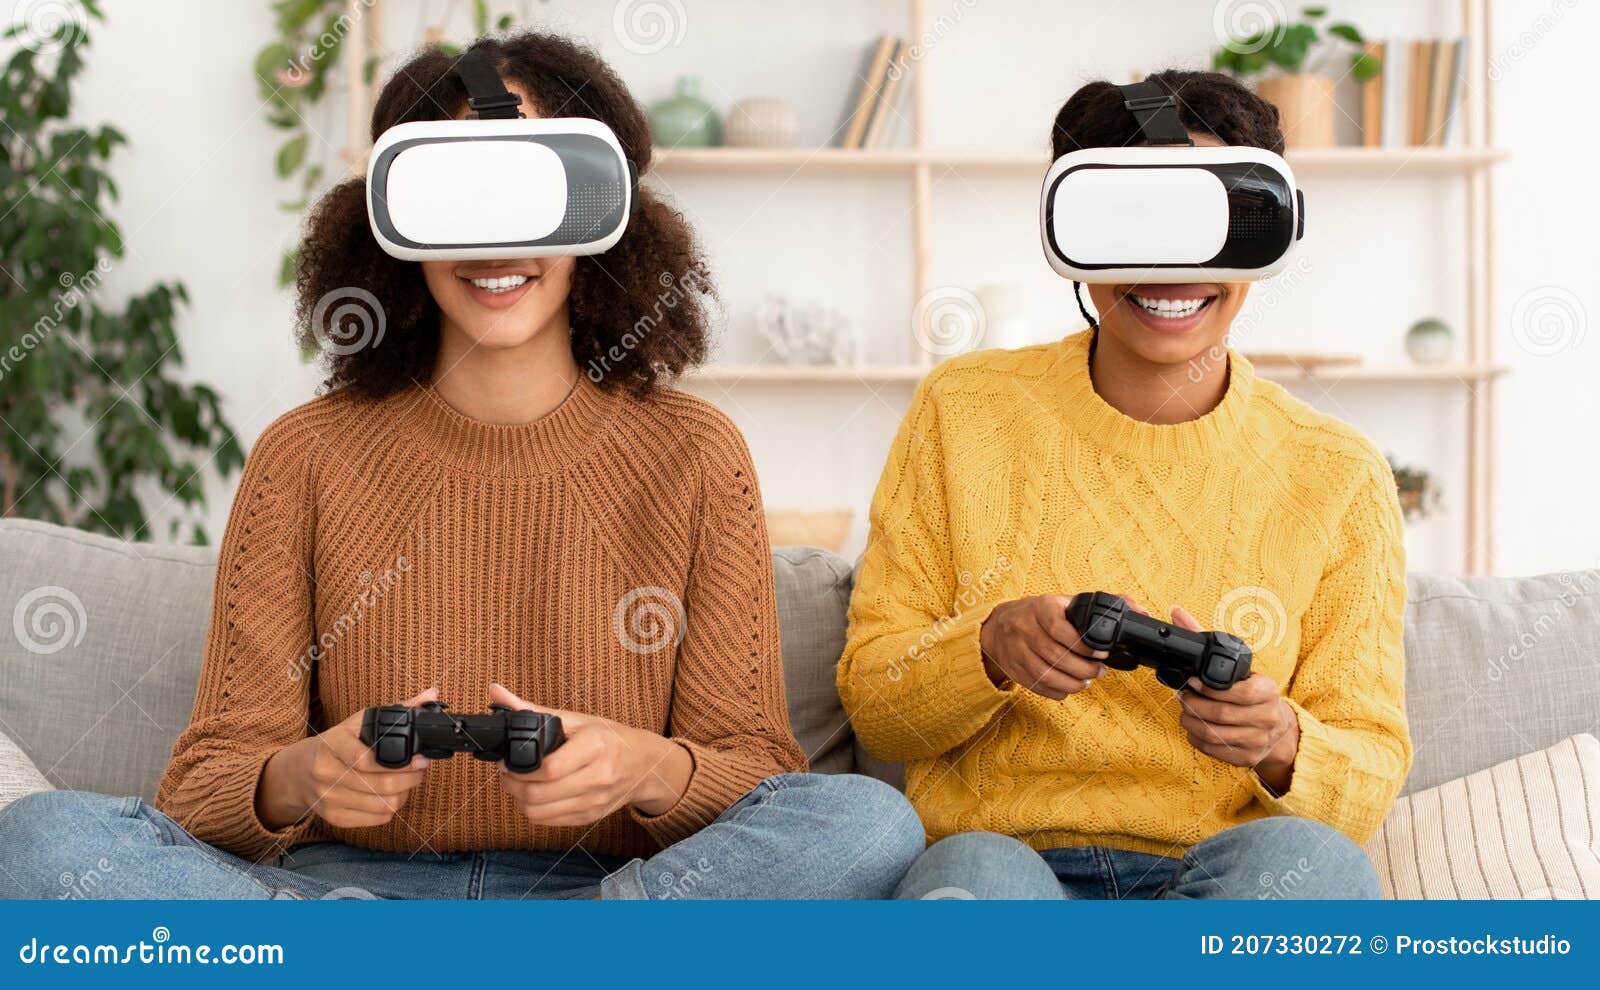 224,816 Playing Online Games Images, Stock Photos, 3D objects